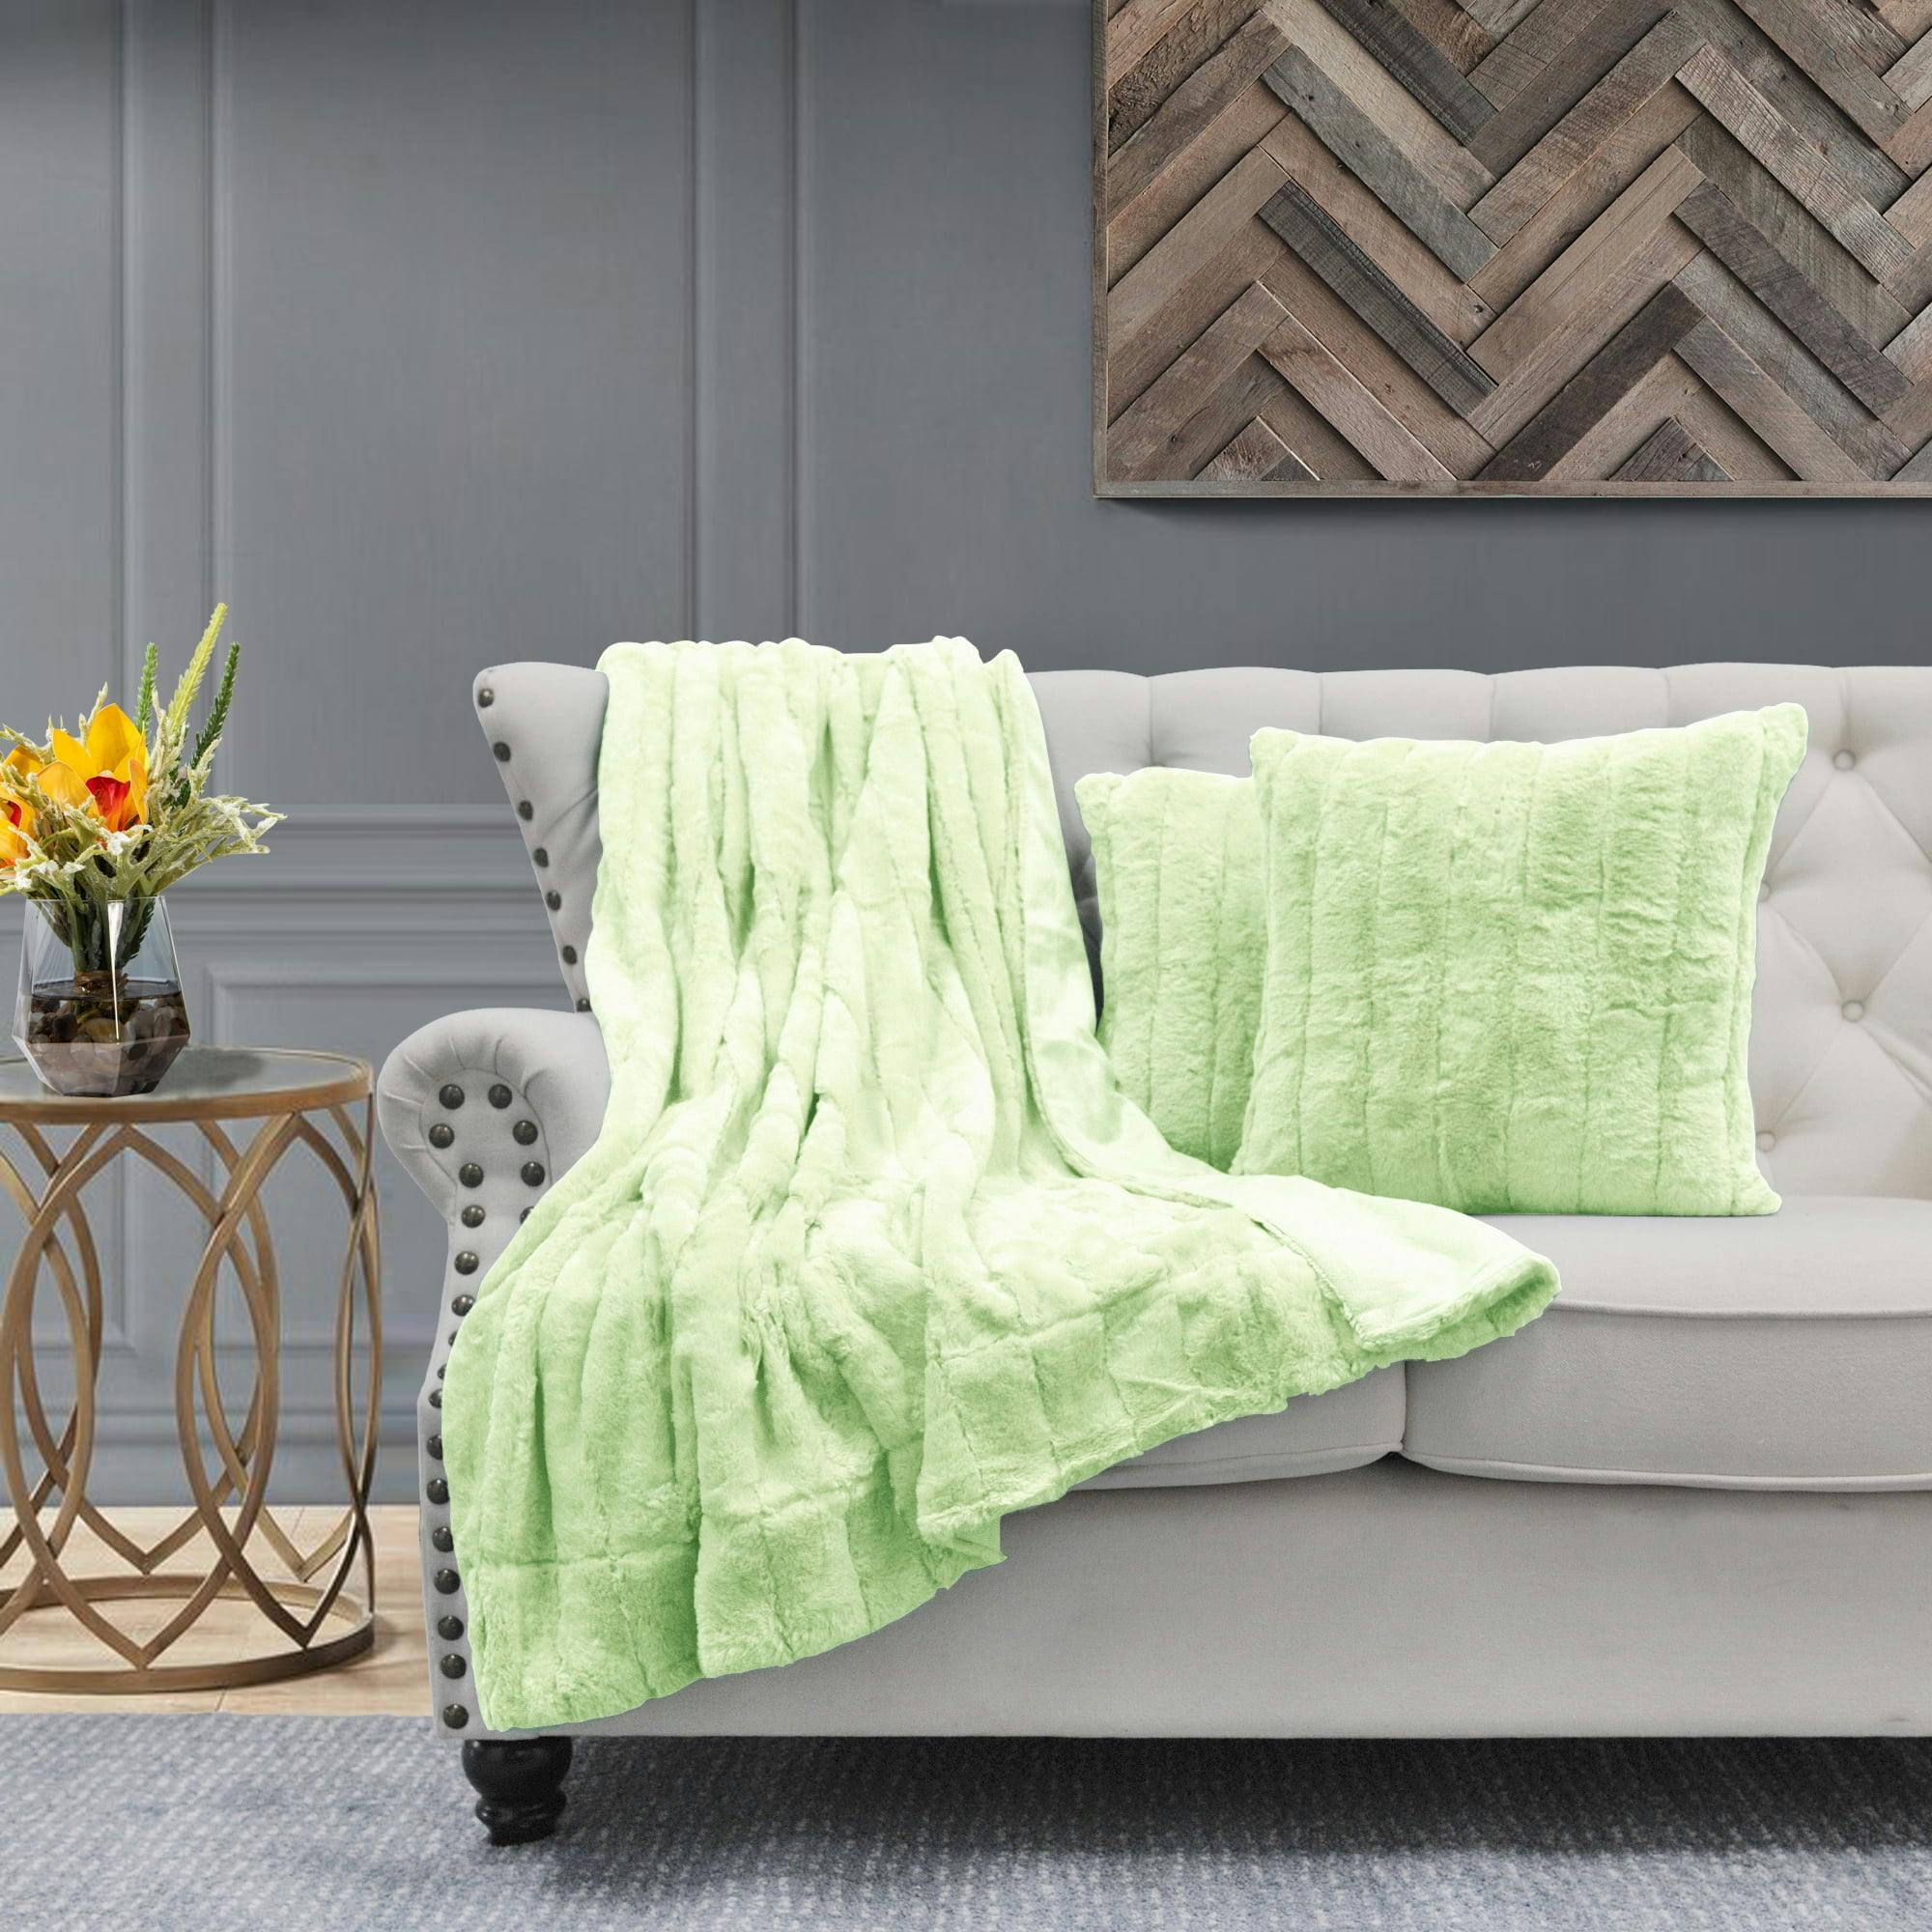 Nile Green Luxurious Faux Fur Throw 50" x 60" with Matching Pillow Covers